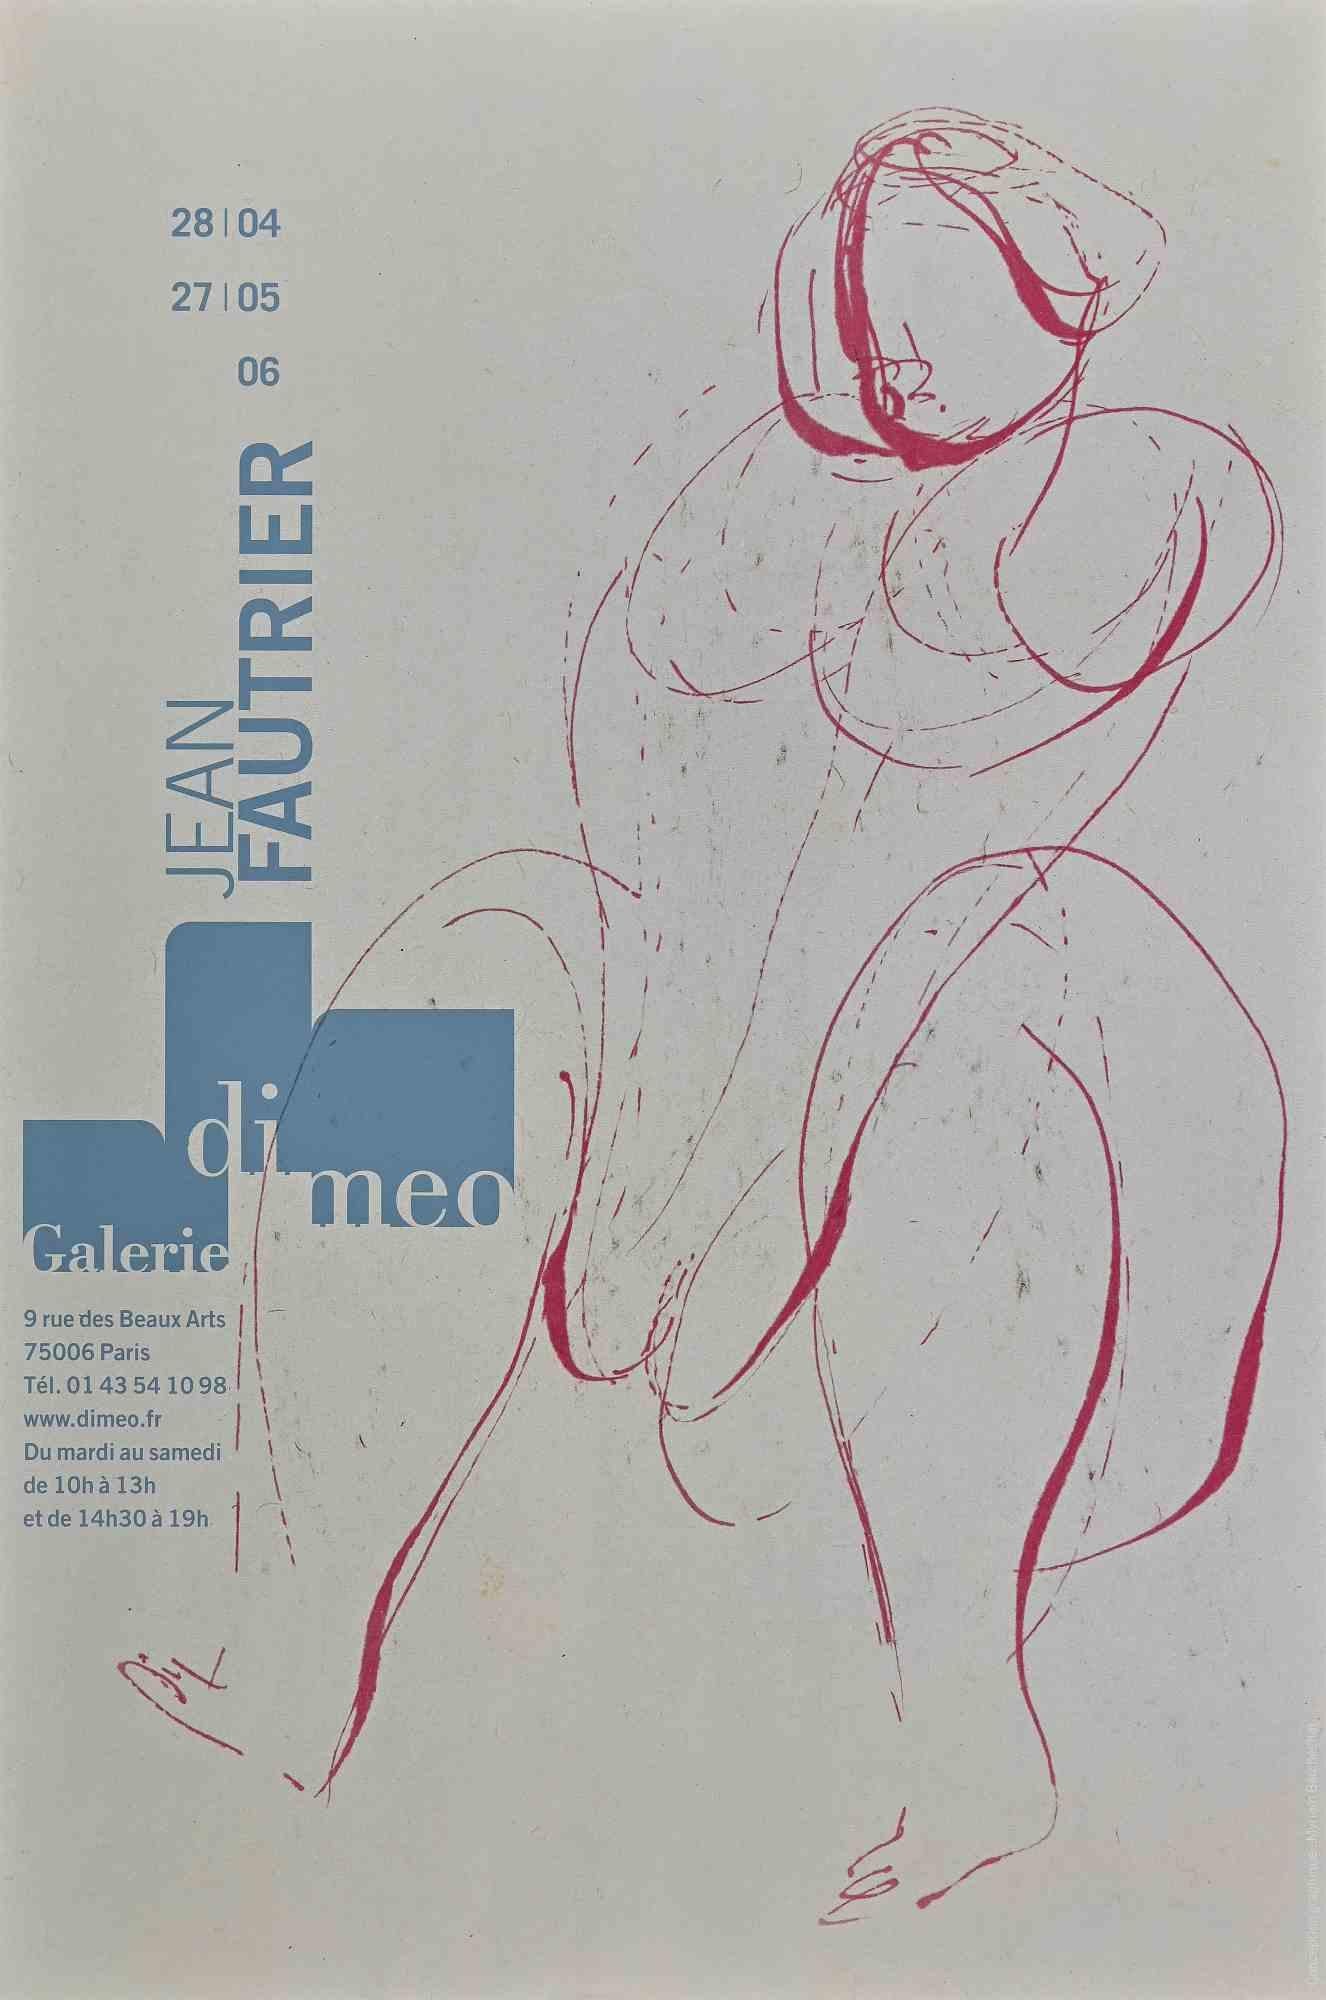 Vintage Exhibition Poster is a vintage Offset print realized for the exhibition of Jean Fautrier in 2006.

Good condition, no signature.

The exhibition is in Galerie Di Meo in Paris.

Jean Fautrier (May 16, 1898 – July 21, 1964) was a French